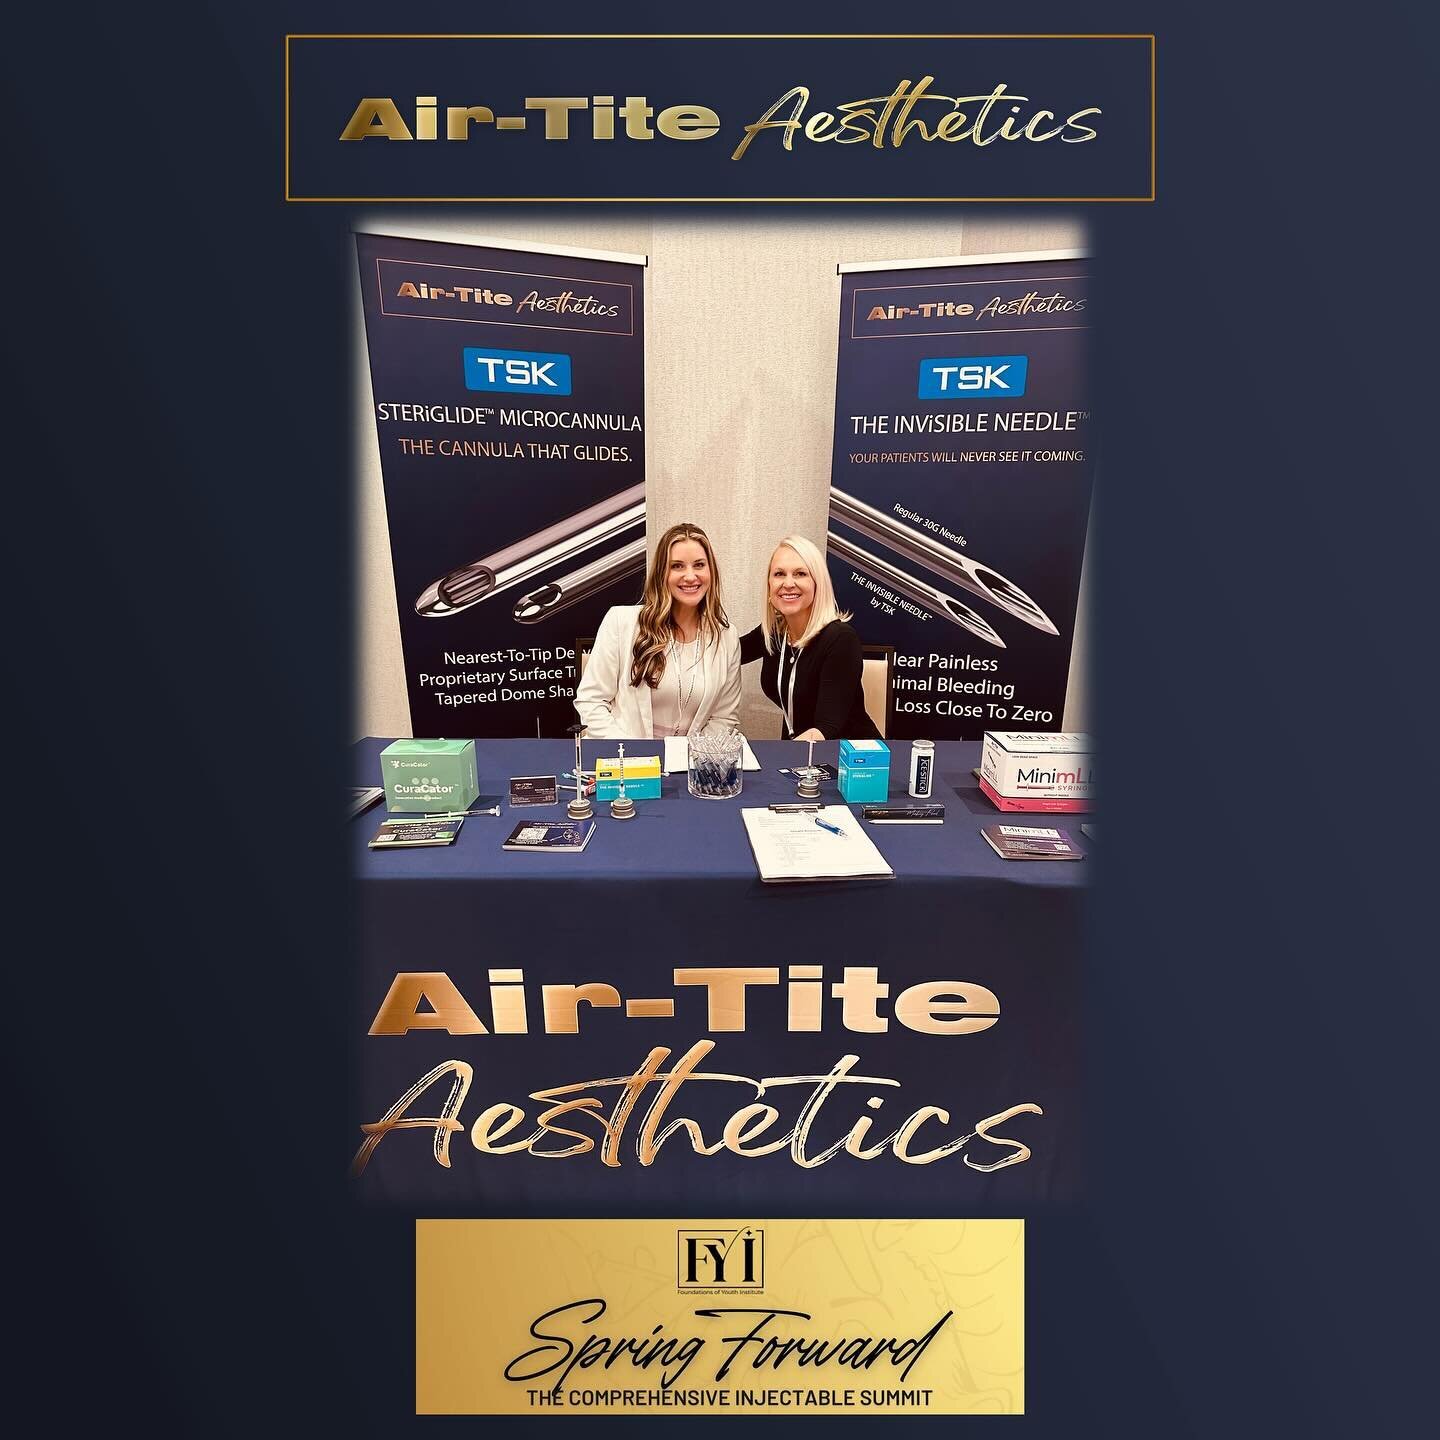 Air-Tite was a proud sponsor of the Spring Forward Comprehensive Injectable Summit in our hometown of Virginia Beach this past weekend! Thank you @injectortrisha for having us and for all of the wonderful attendees who came by our booth!
#MedSpa #Inj